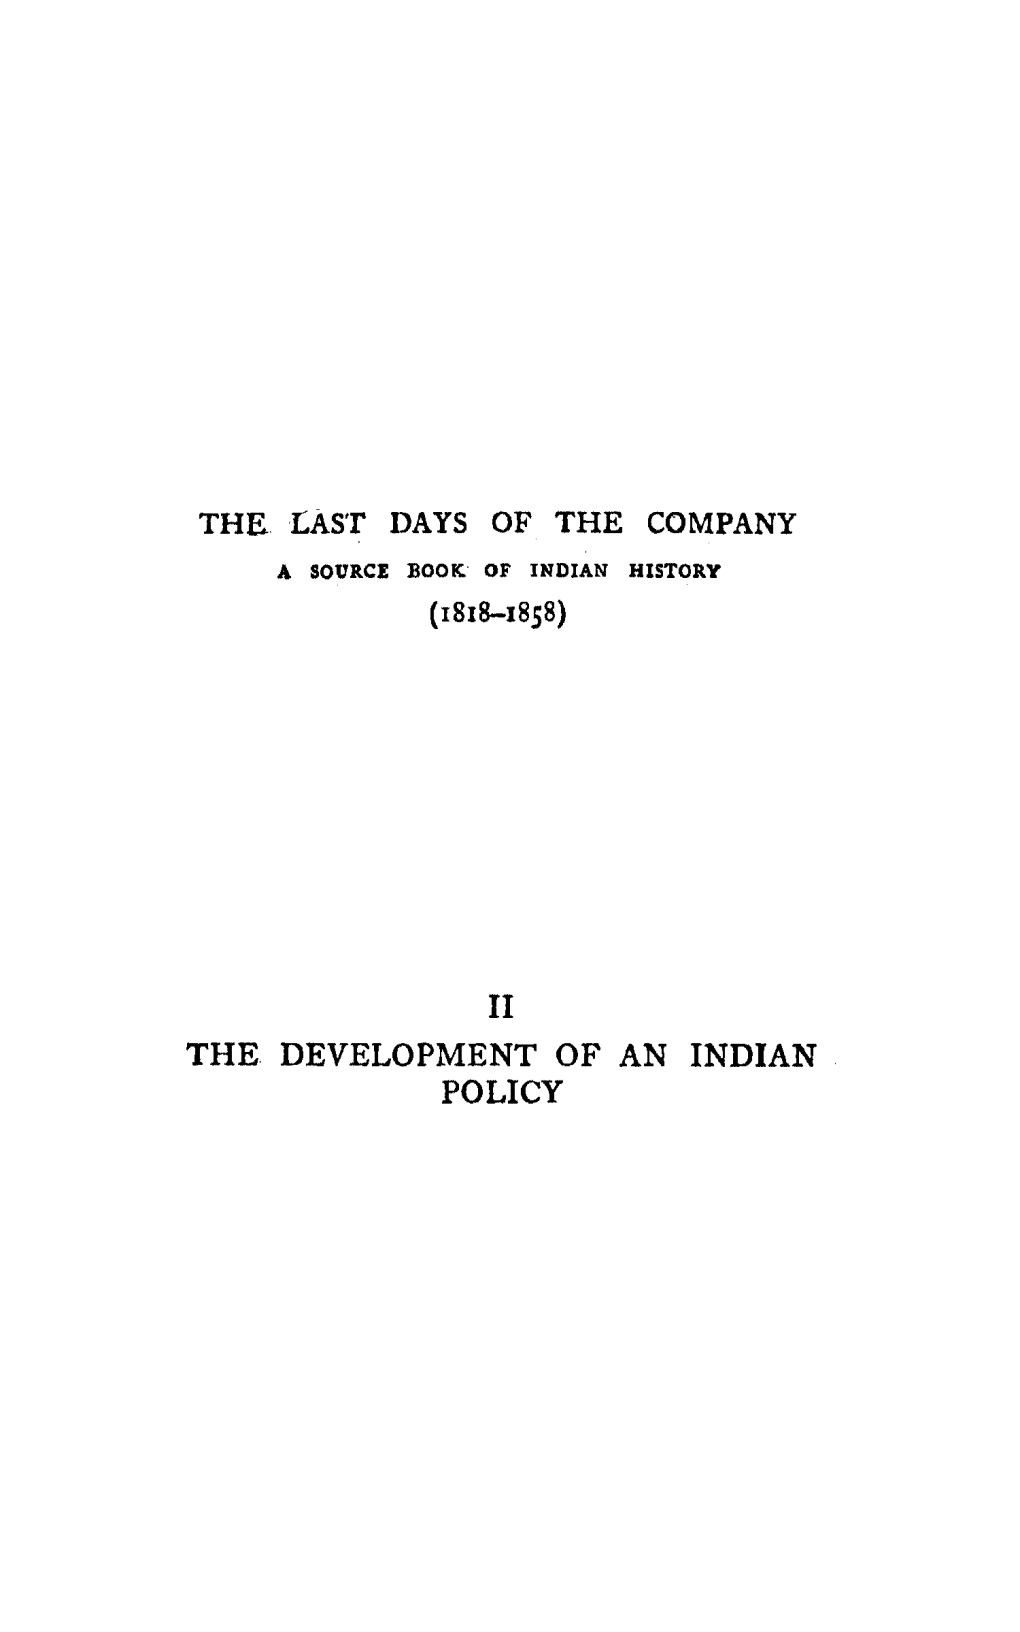 Ii the Development of an Indian Policy the Last Days of the Company a Source Book of Indian History 1818 1858 by G